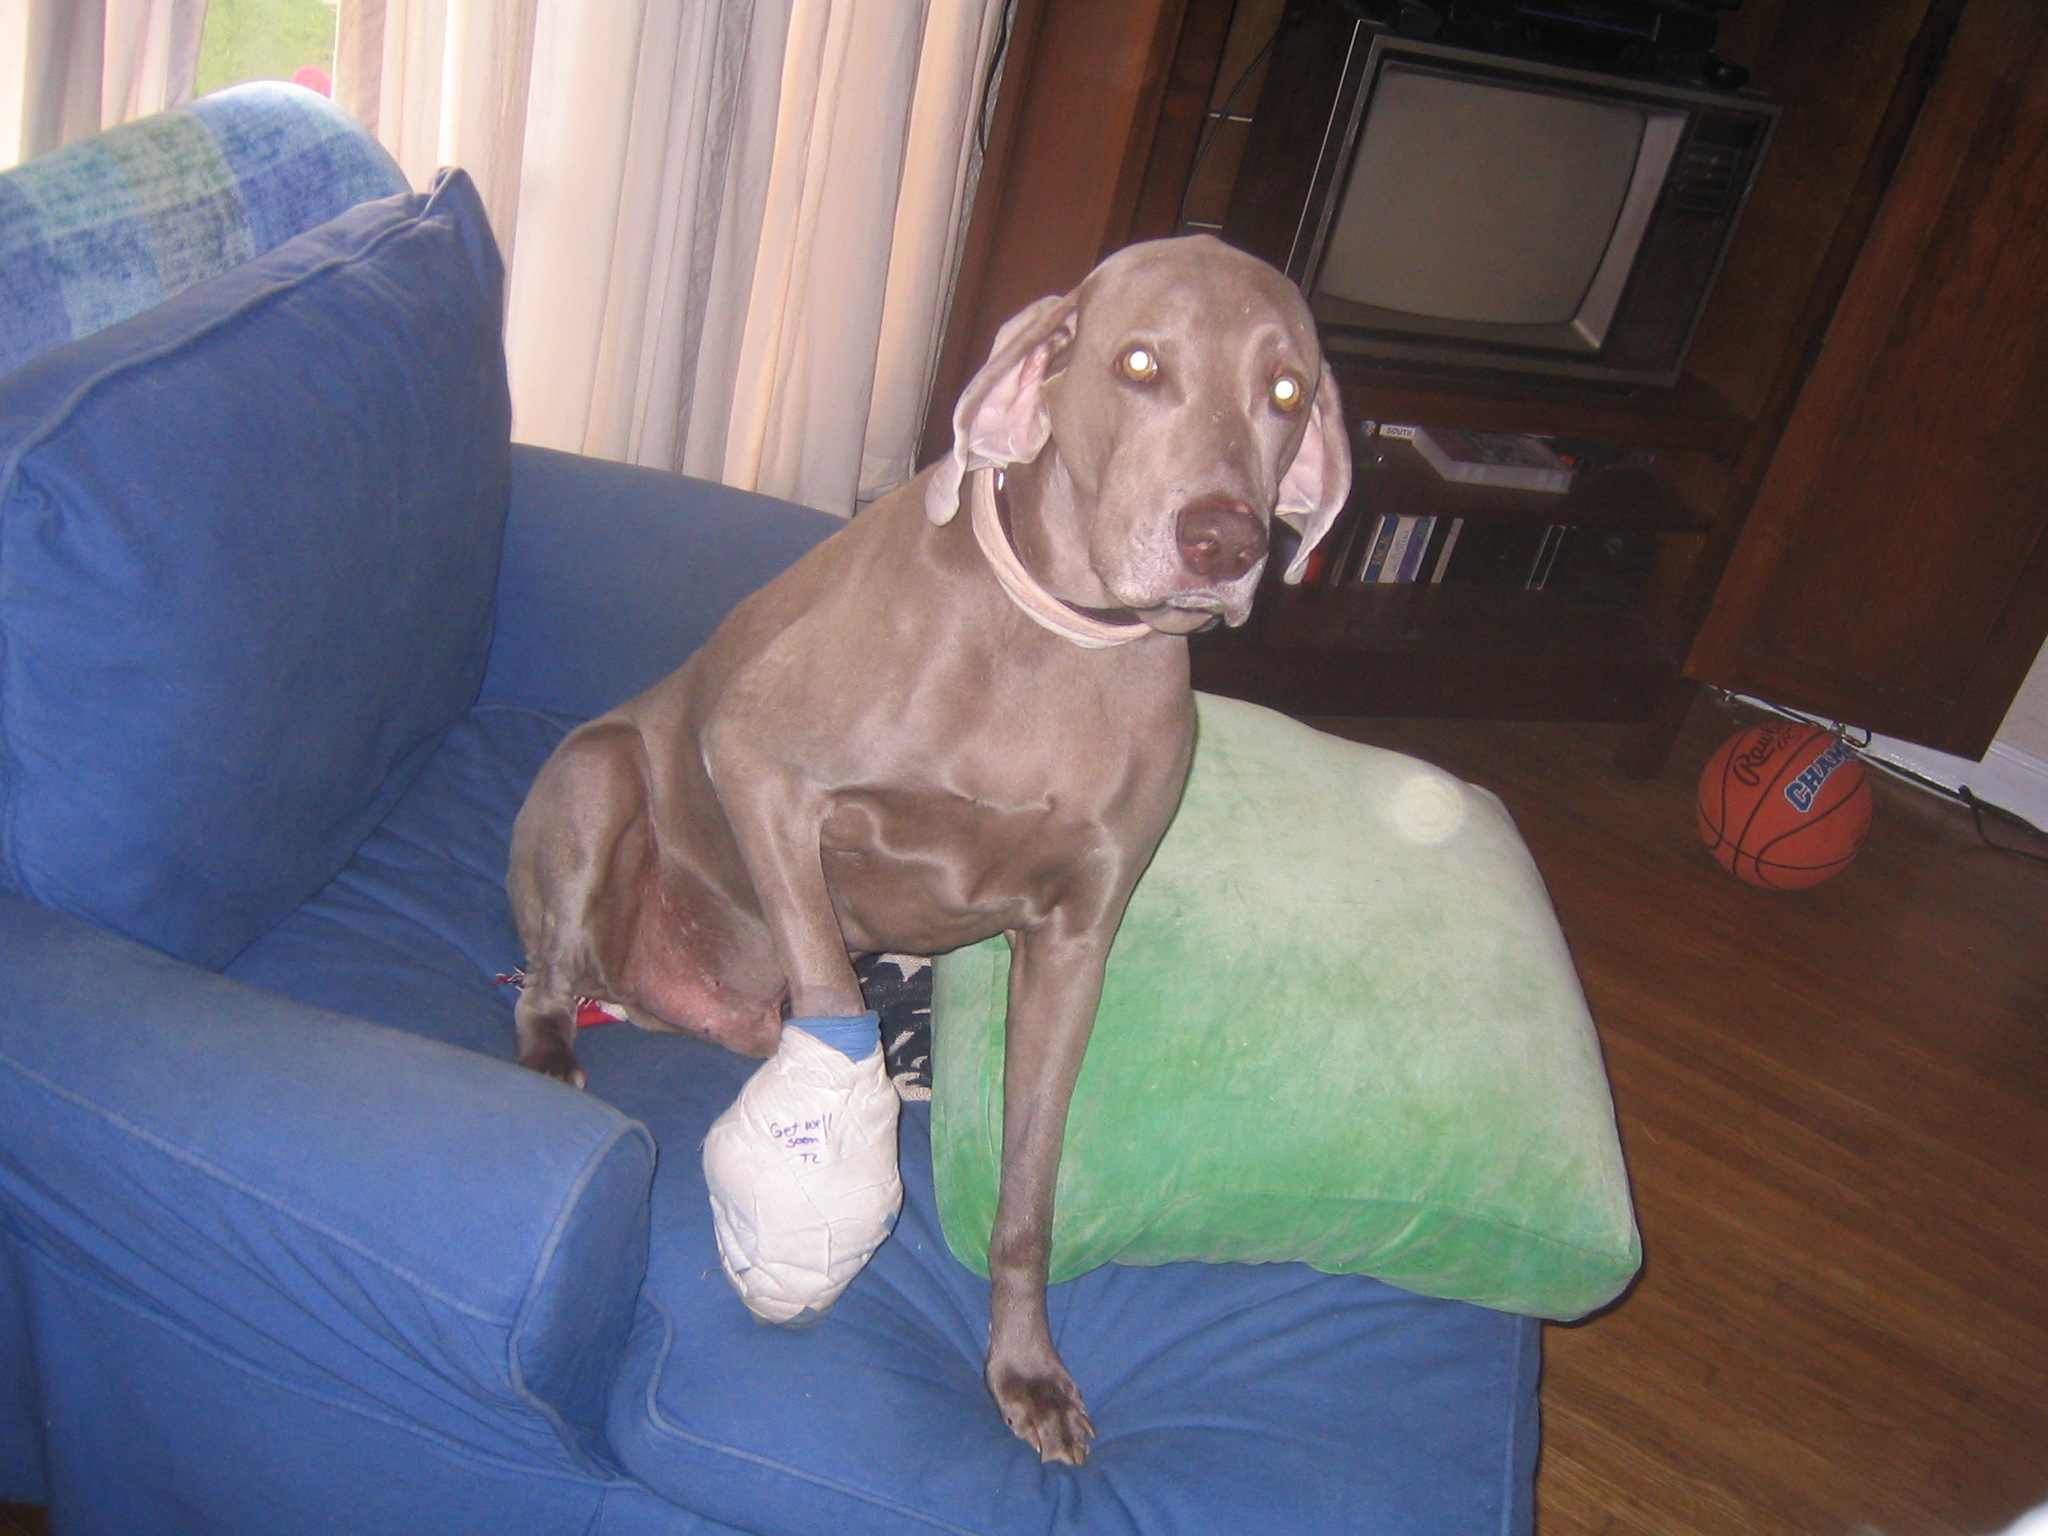 Yeager's bandaged paw during his recovery period after surgery.